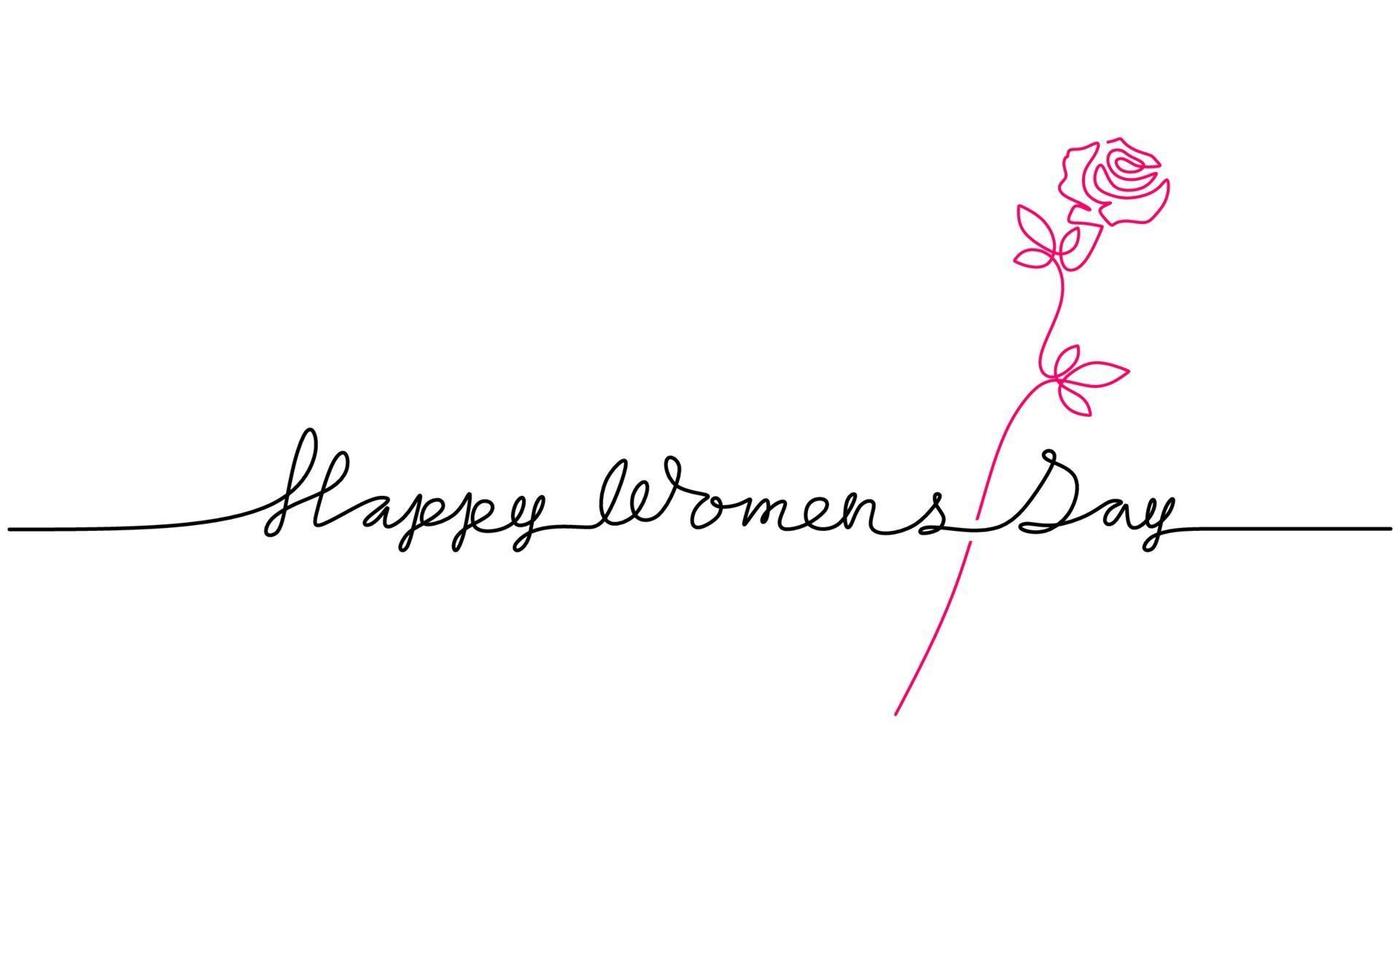 Happy Women's day lettering in continuous line drawing. International Women's Day on March 8. Concept Women's day isolated on white background. Vector hand made calligraphic for greeting card